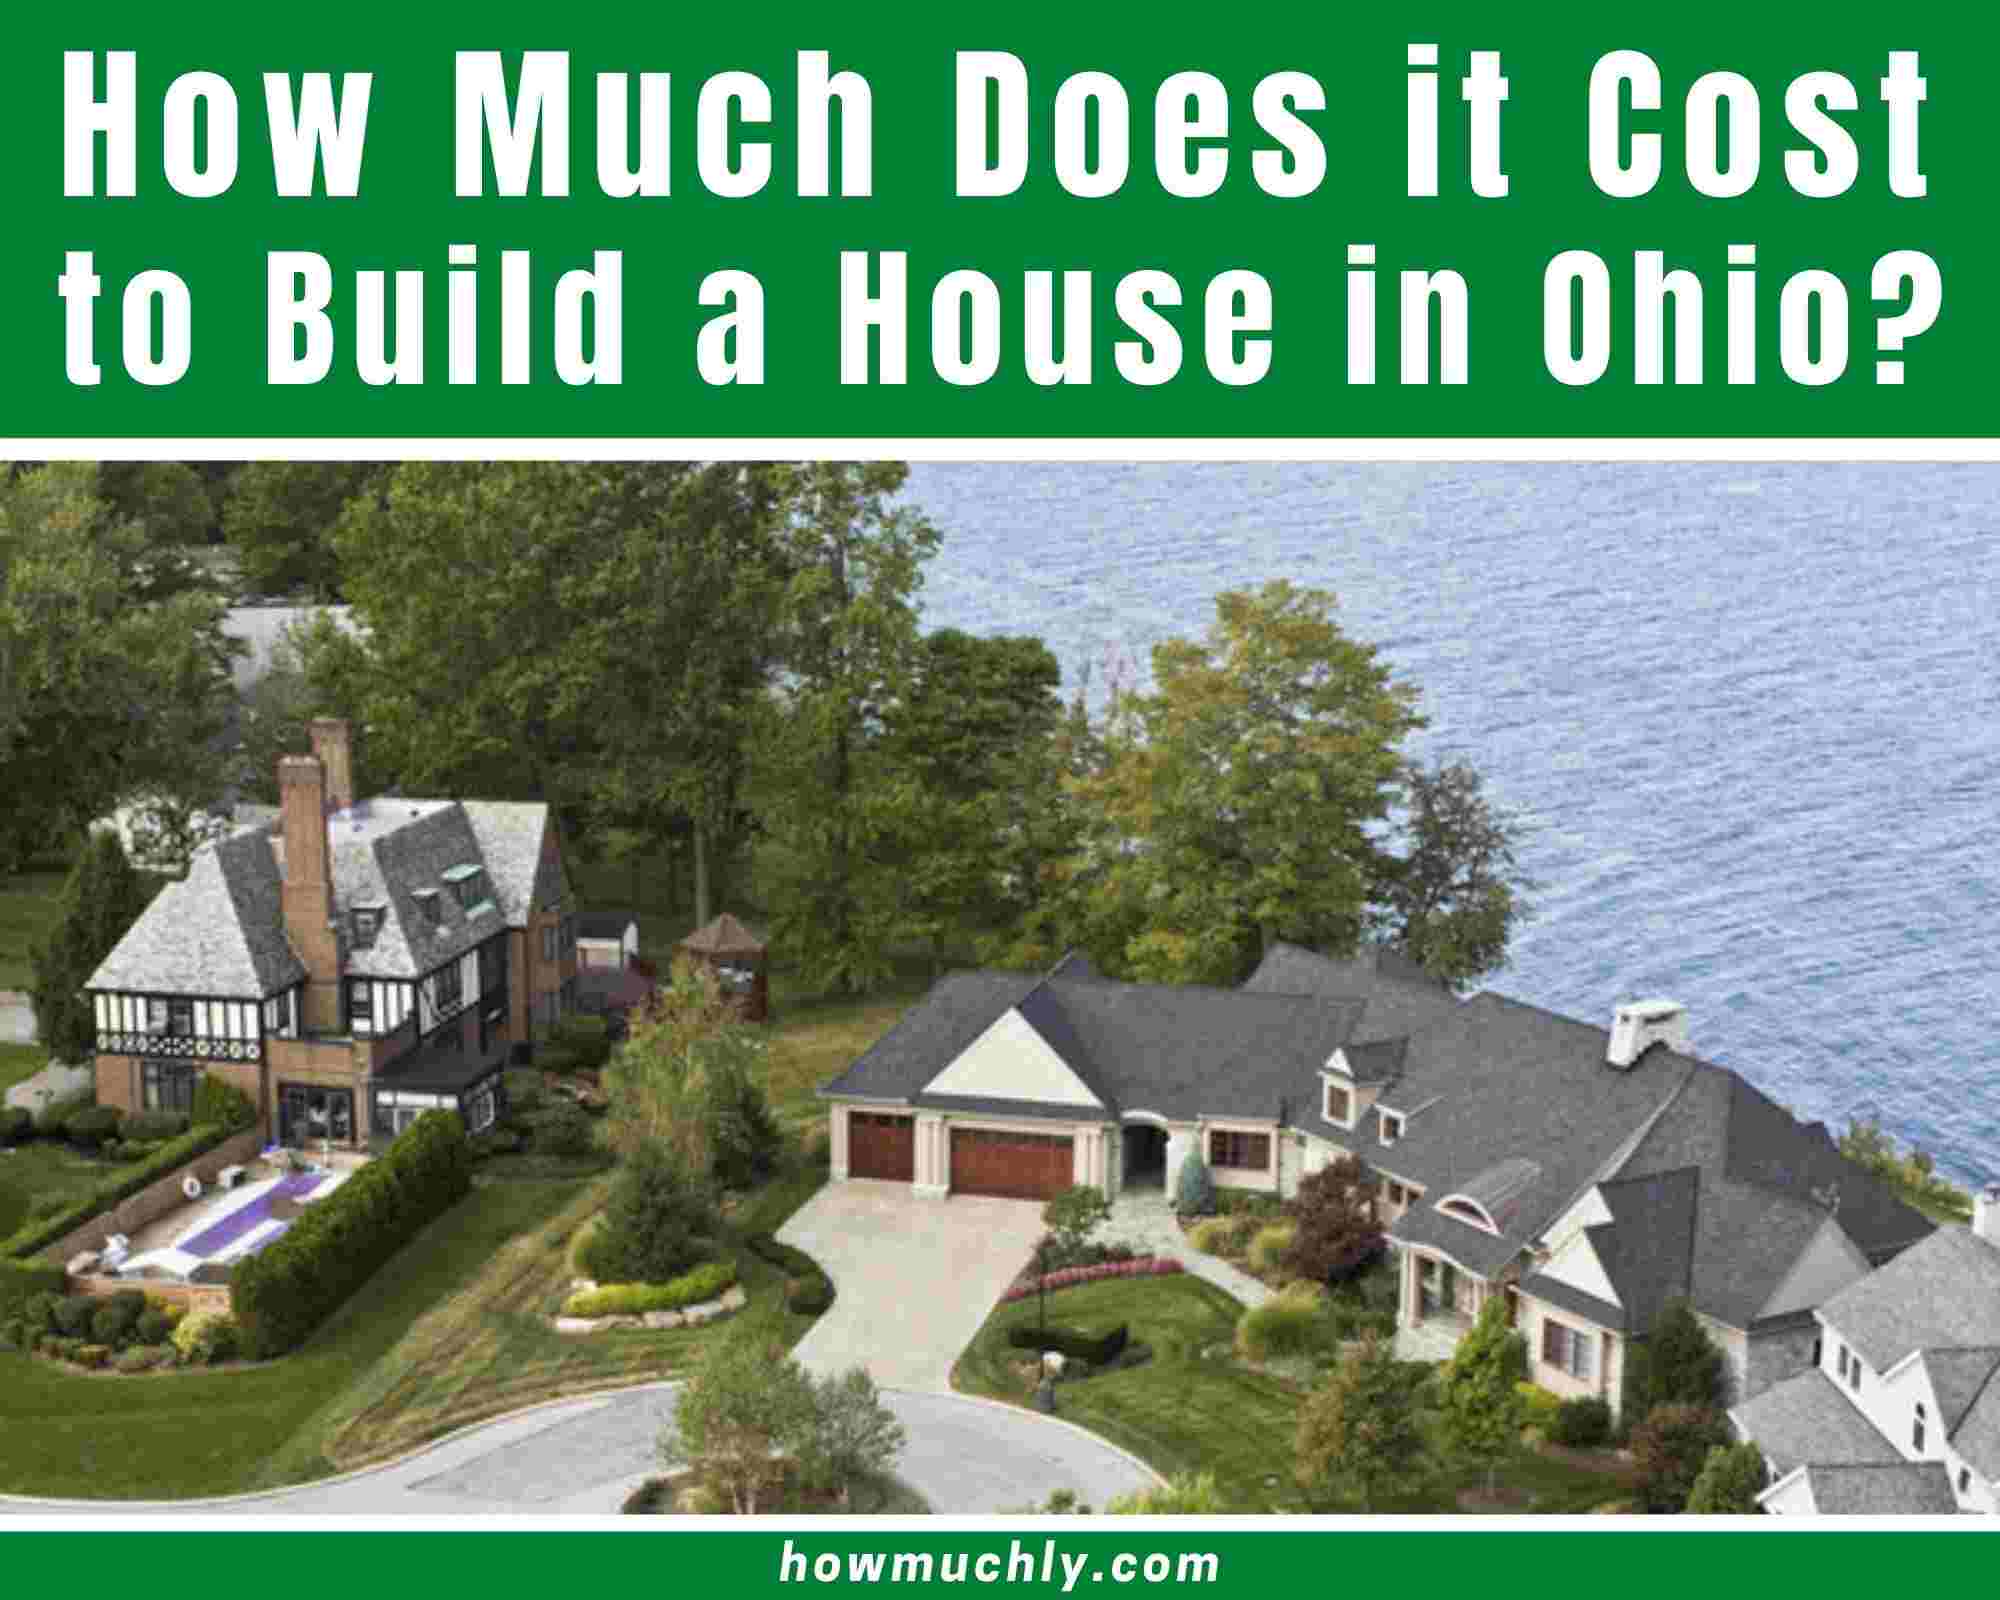 How Much Does it Cost to Build a House in Ohio? OH [2022]